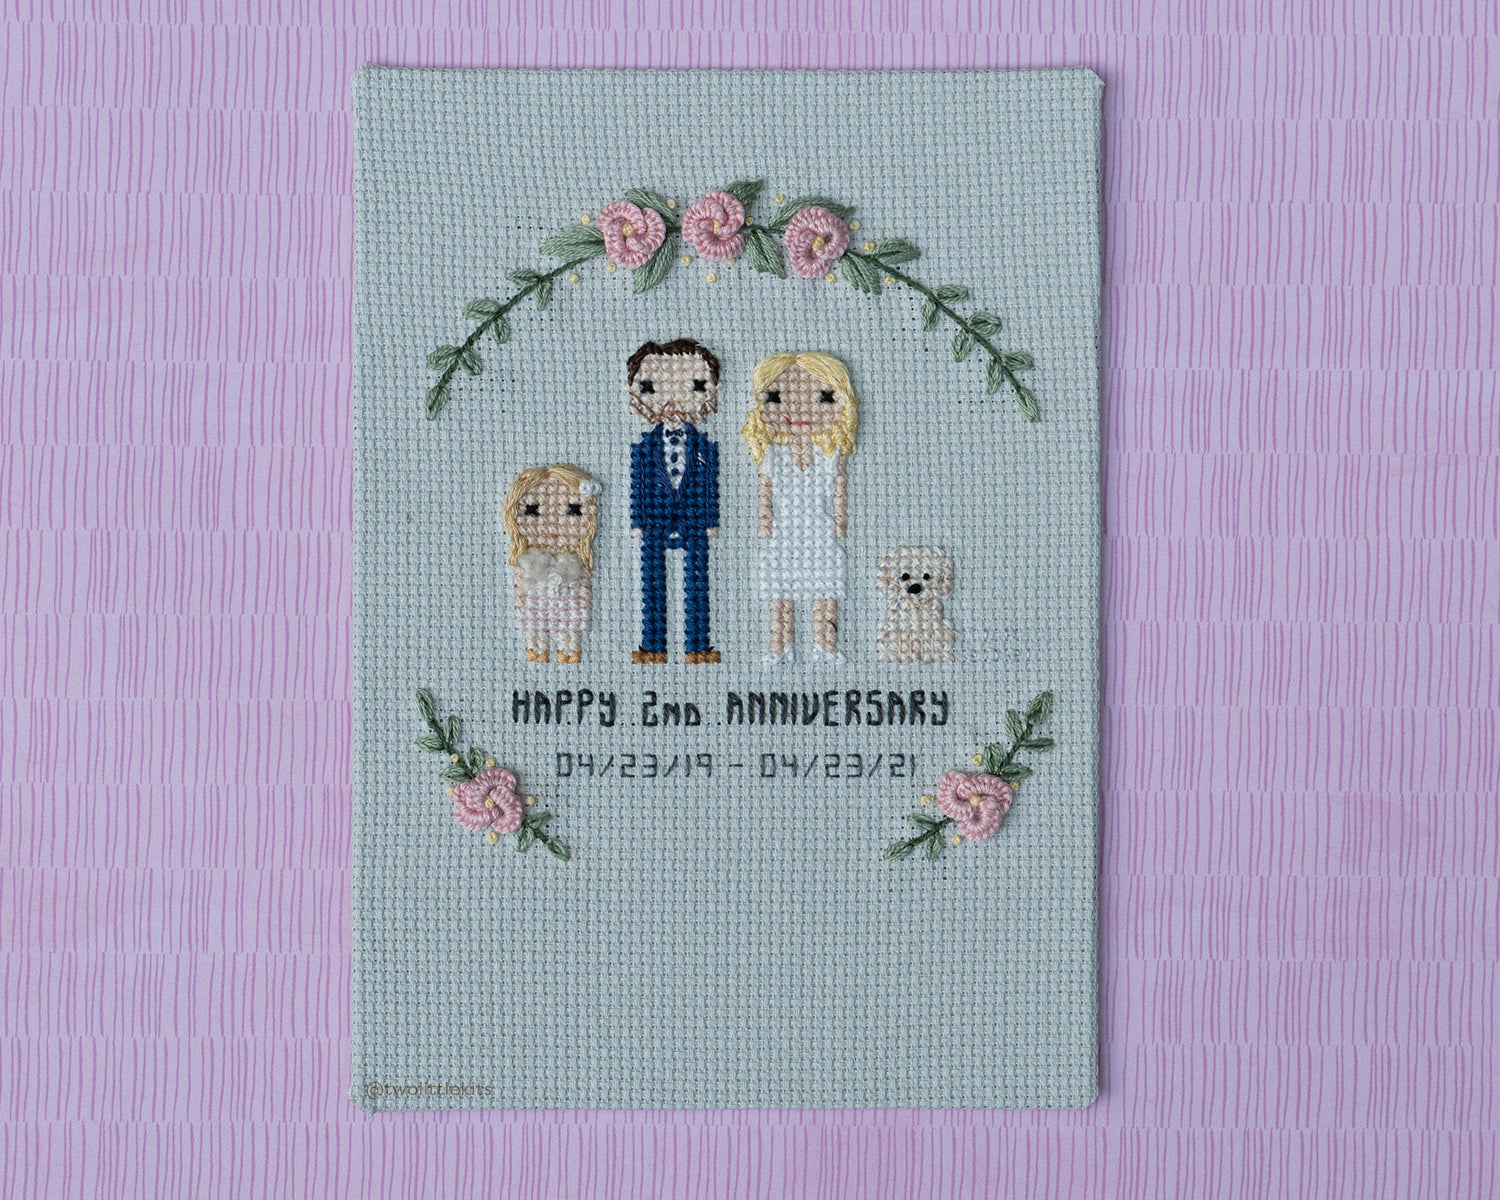 A cross-stitched bride and groom with their daughter and dog. It is mounted on a rectangular board and reads "HAPPY 2nd ANNIVERSARY" with two dates. Around everything is hand-stitched florals.